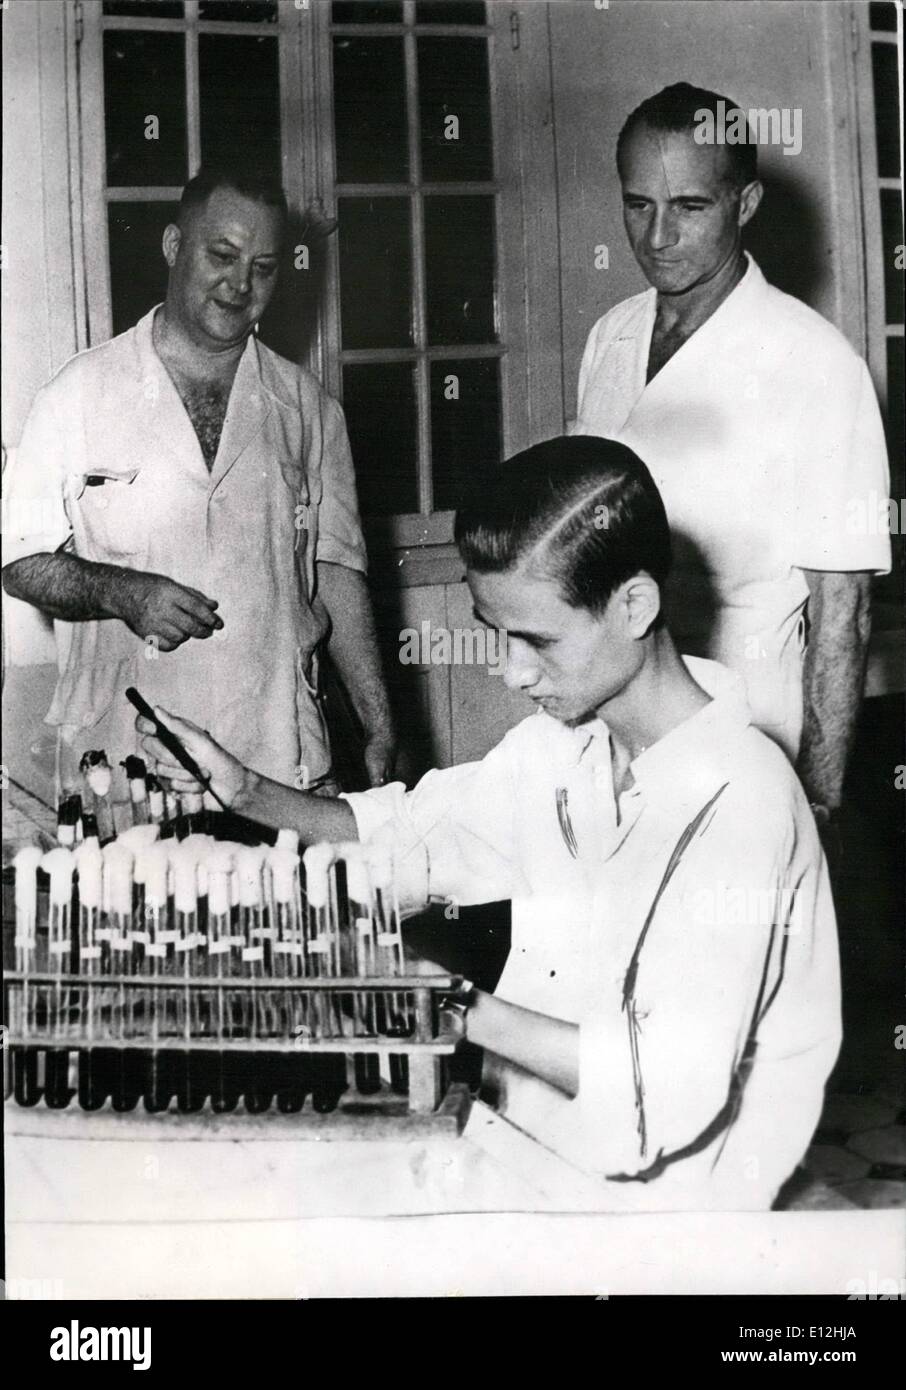 Feb. 24, 2012 - Indo-China: French Governor inspects. Mr. Sainteny, the Governor of North Vietnam, inspects the laboratory of Pasteur Institute while visiting the Northern area recently. Sep. 14/54 Stock Photo